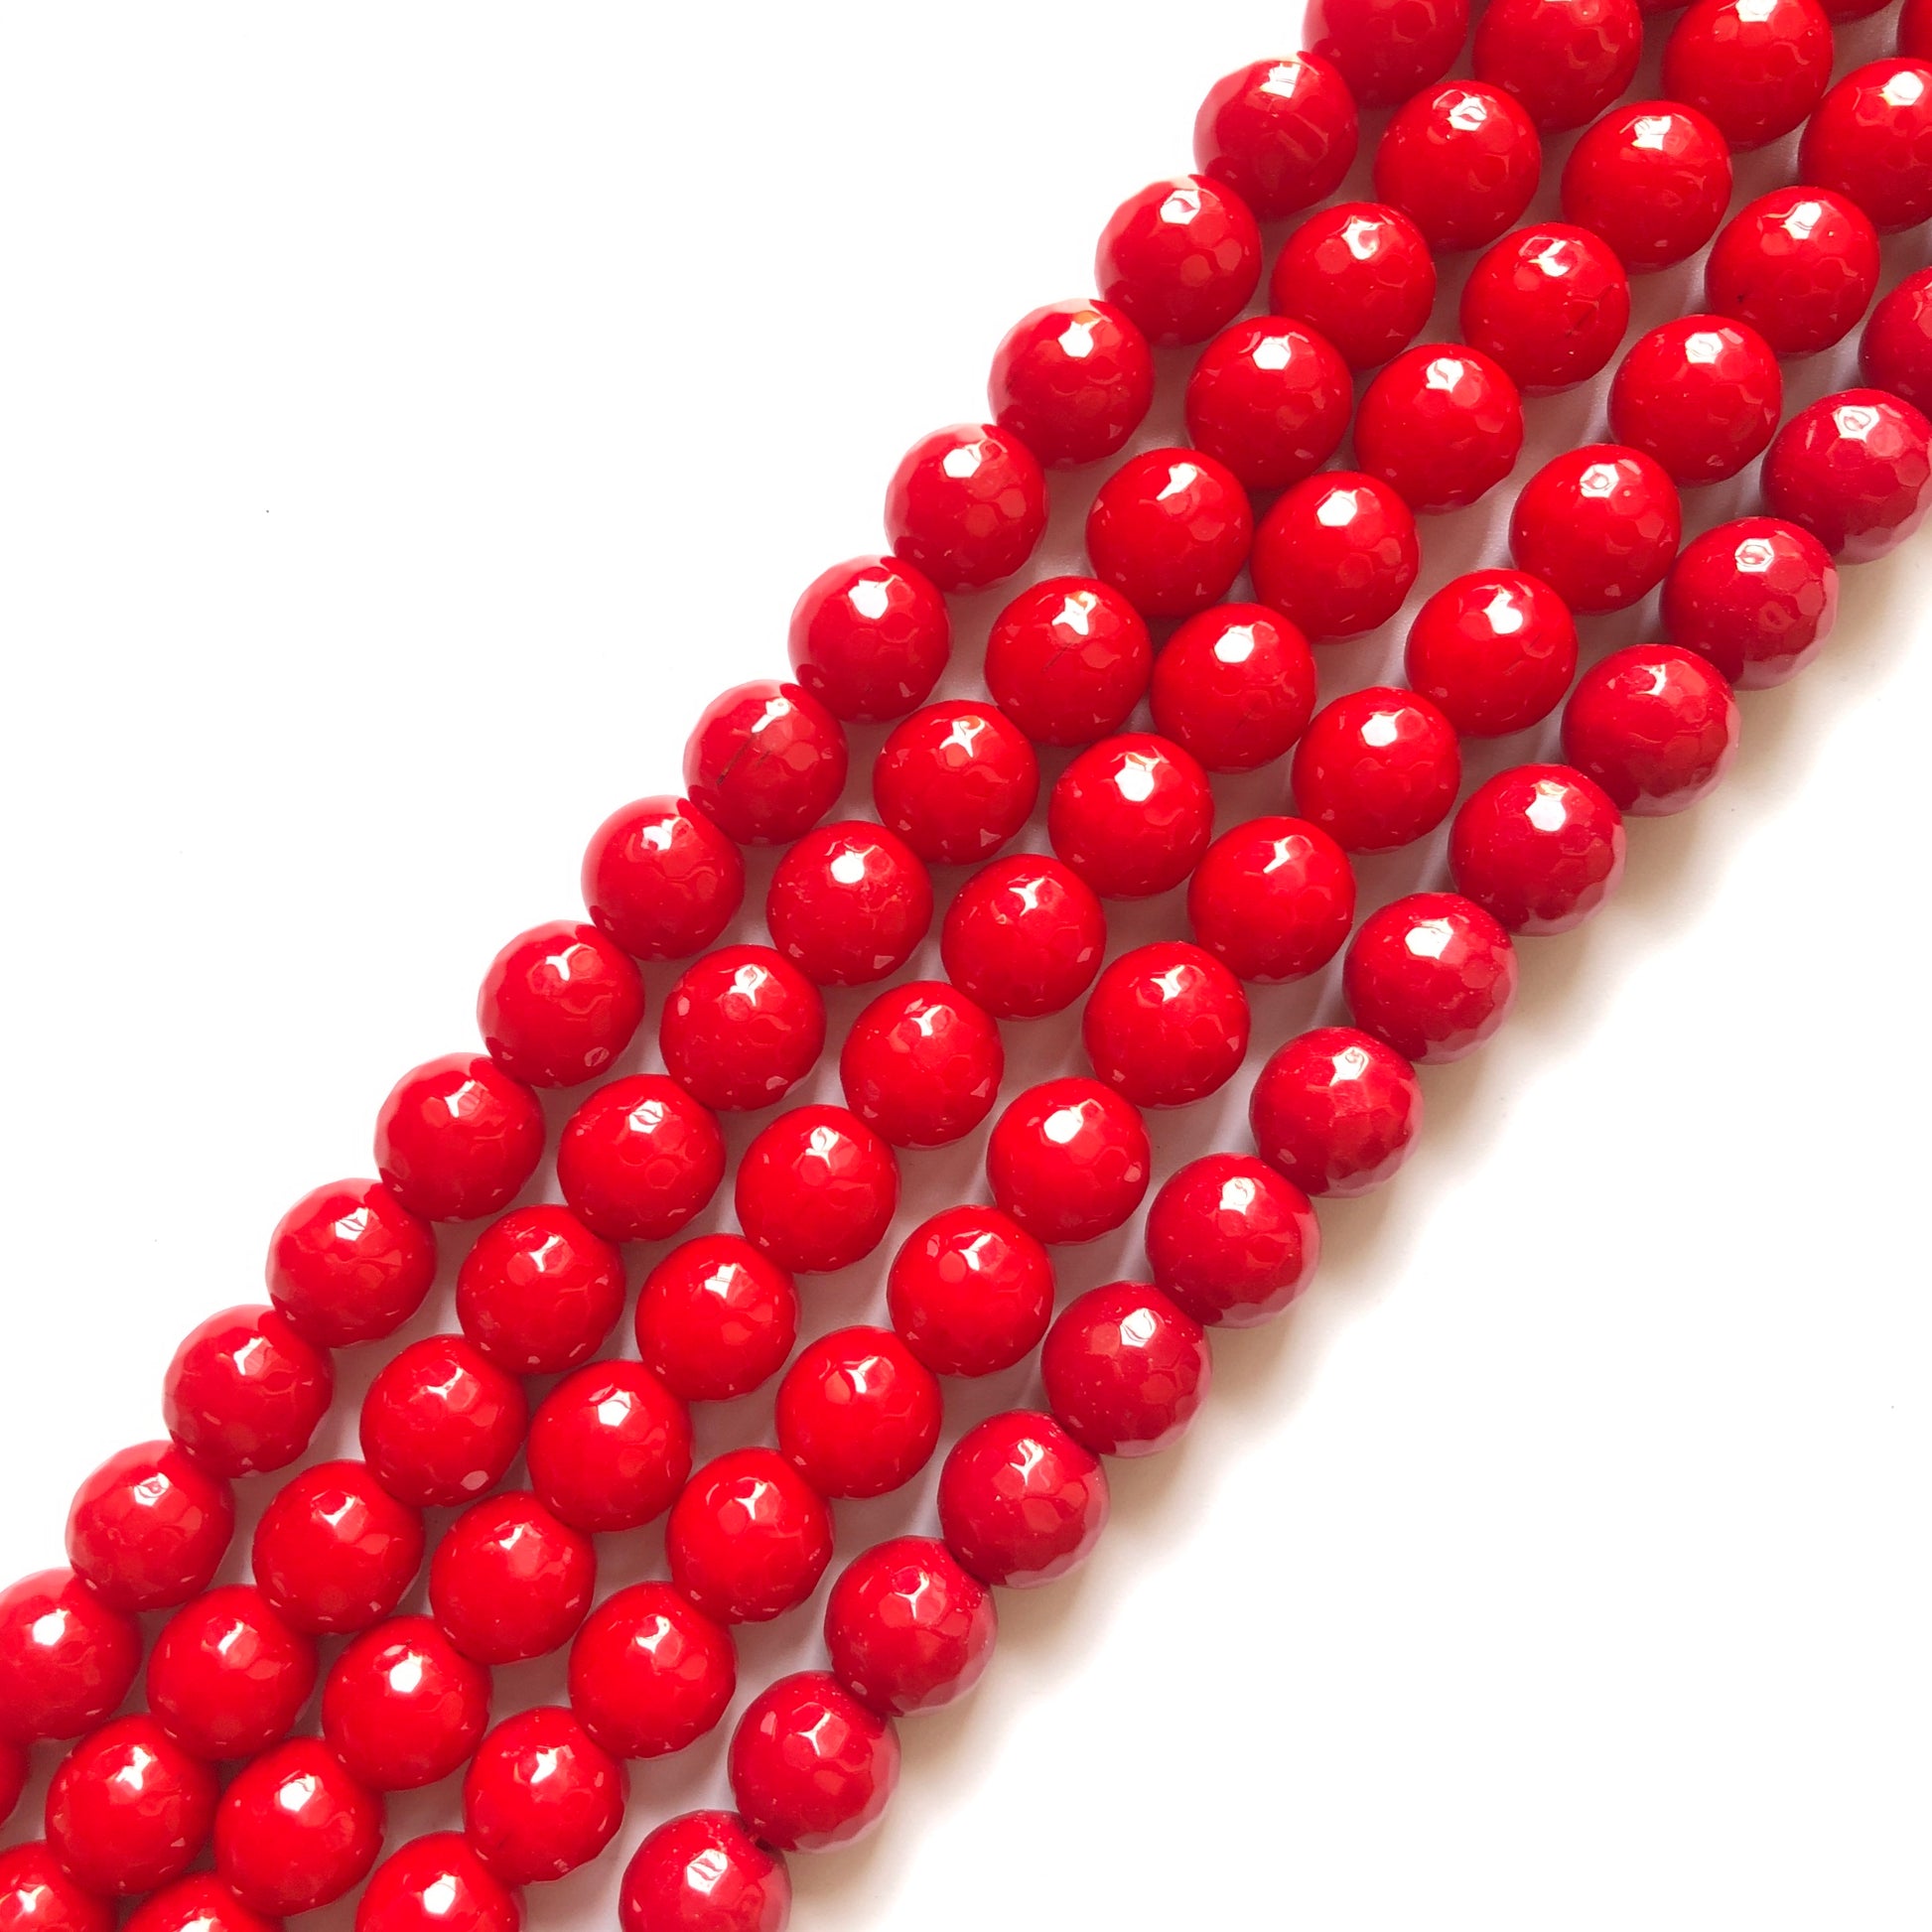 2 Strands/lot 10mm Red Faceted Jade Stone Beads Stone Beads Faceted Jade Beads Charms Beads Beyond